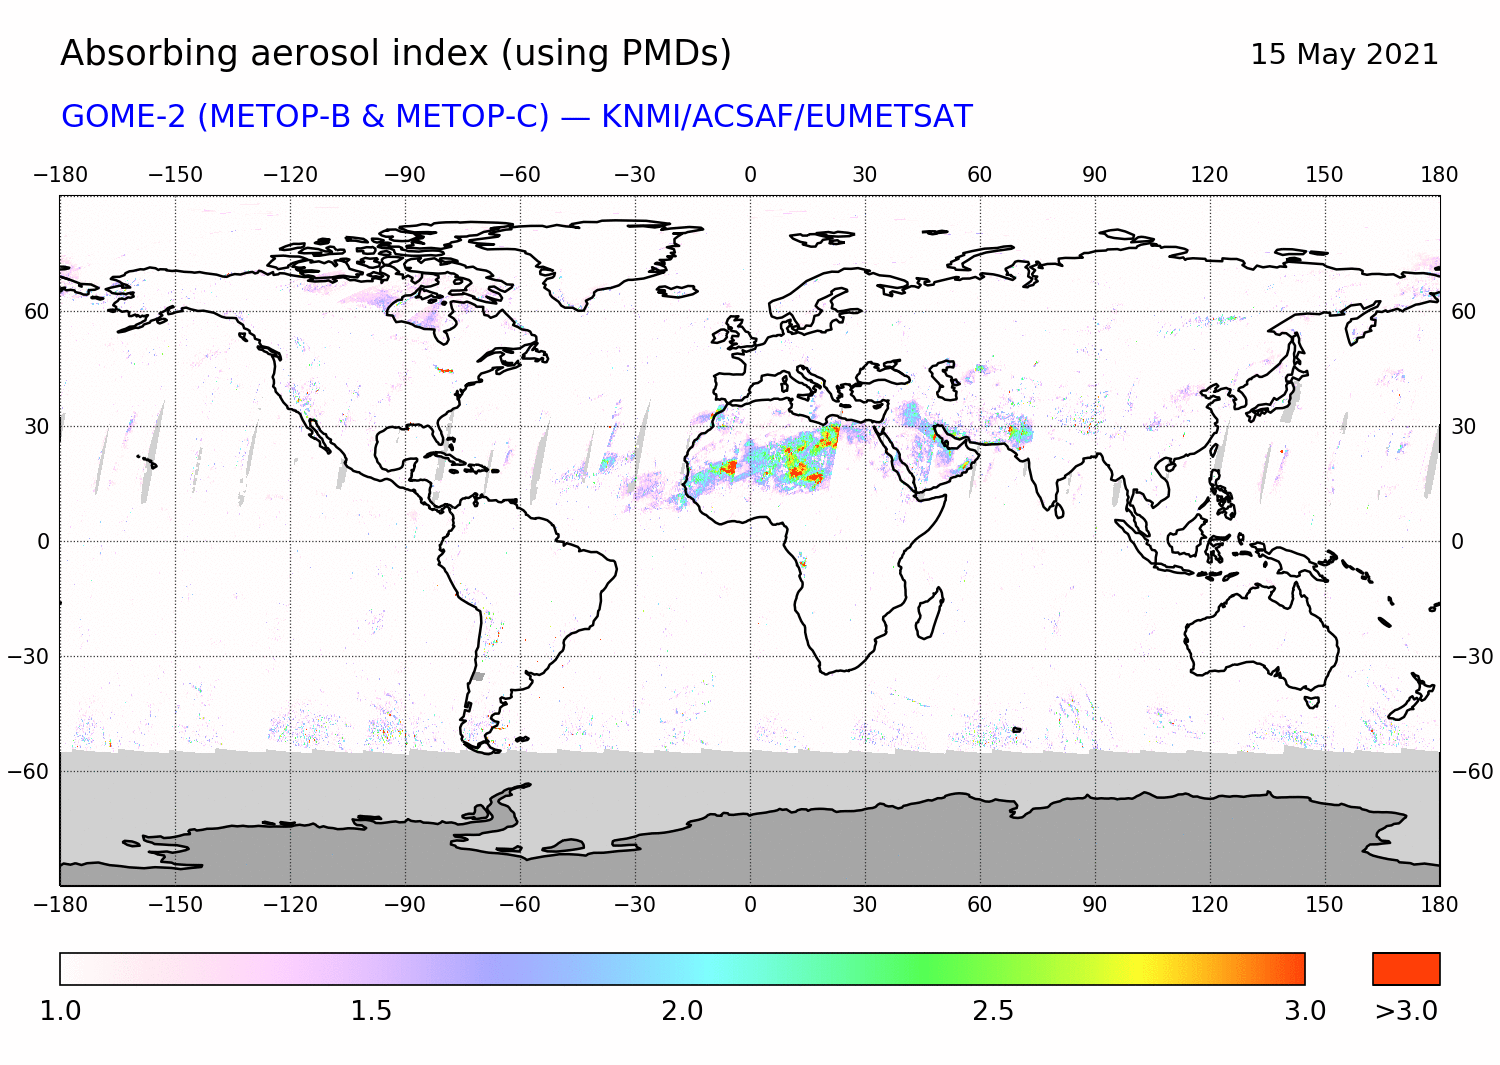 GOME-2 - Absorbing aerosol index of 15 May 2021